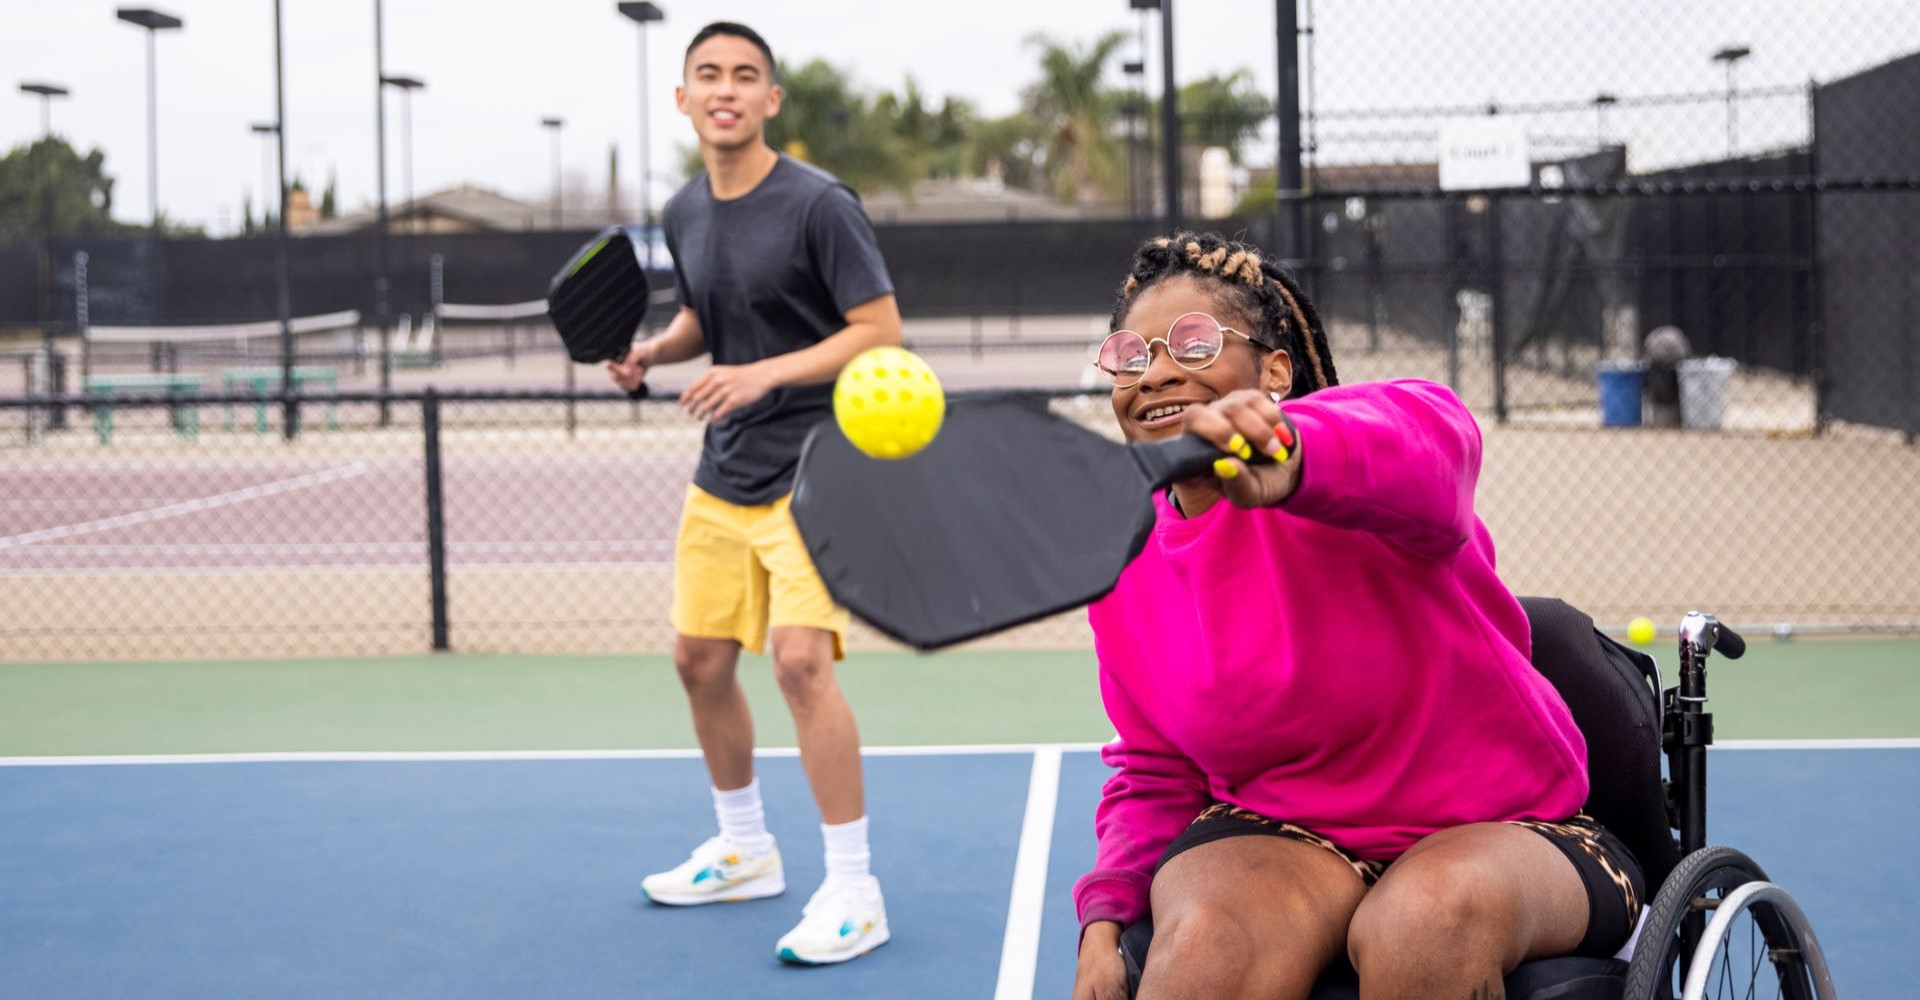 Outdoors Pickleball Court with man and disabled woman.